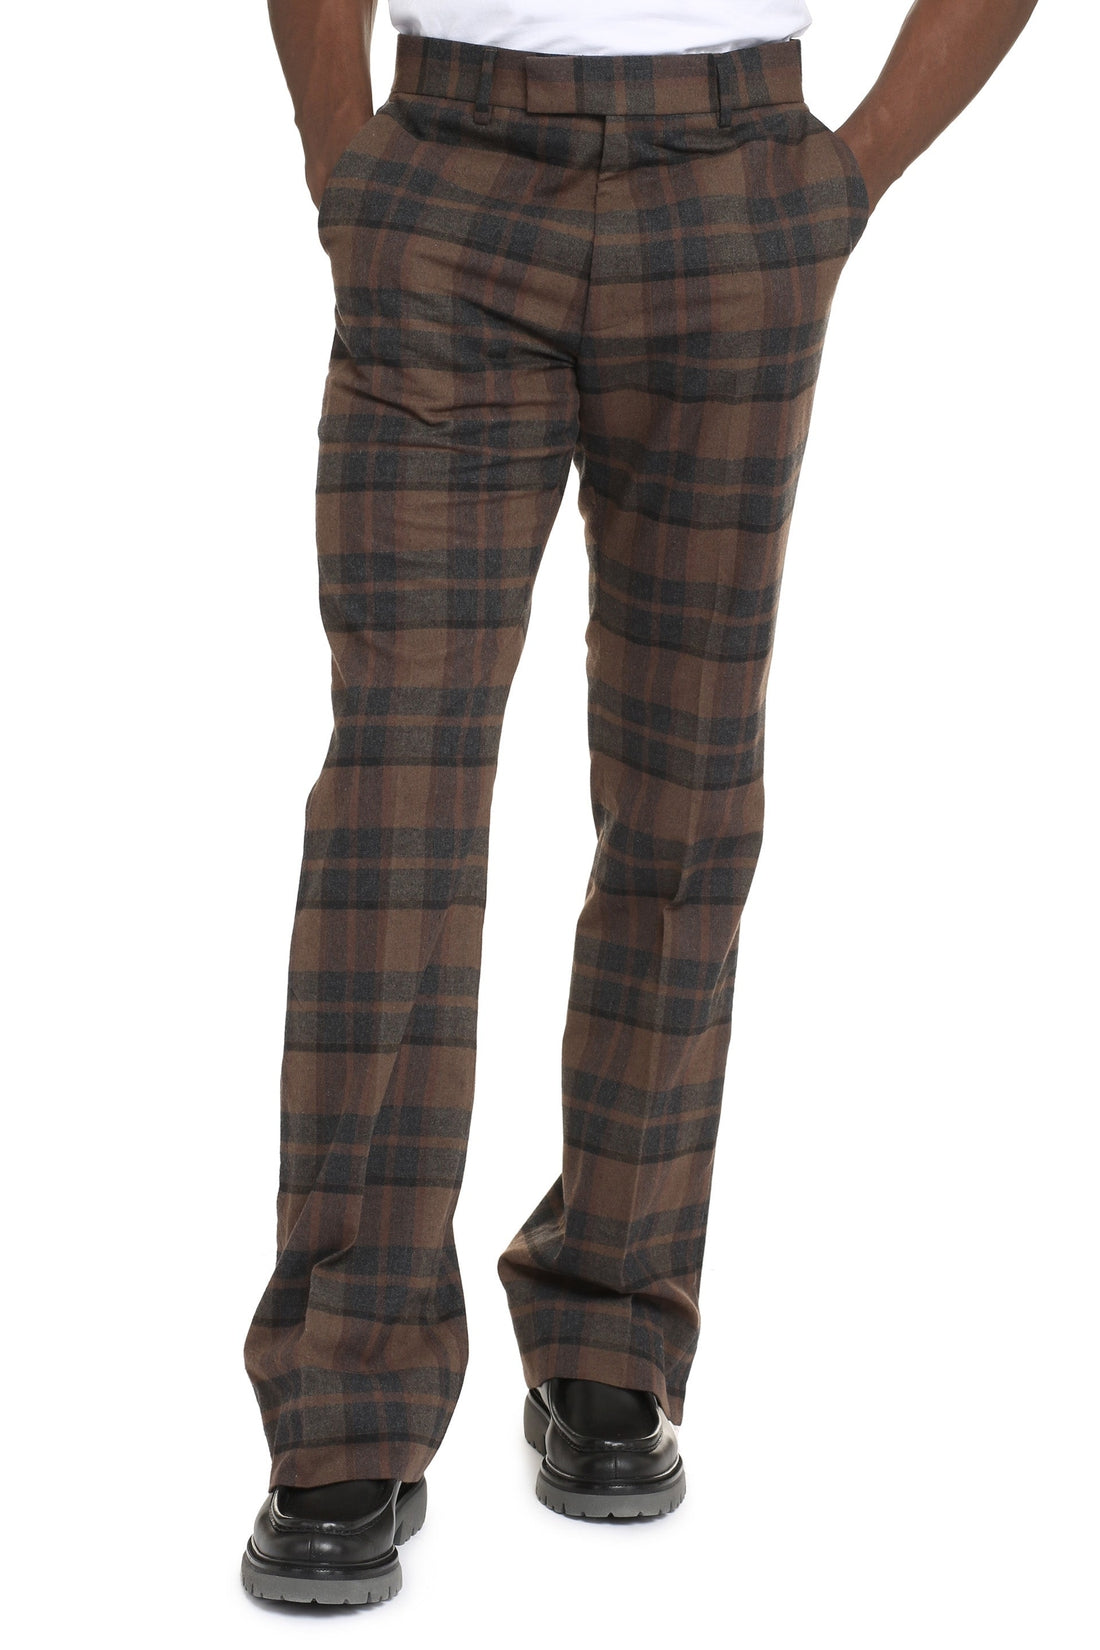 AMIRI-OUTLET-SALE-Printed flared trousers-ARCHIVIST